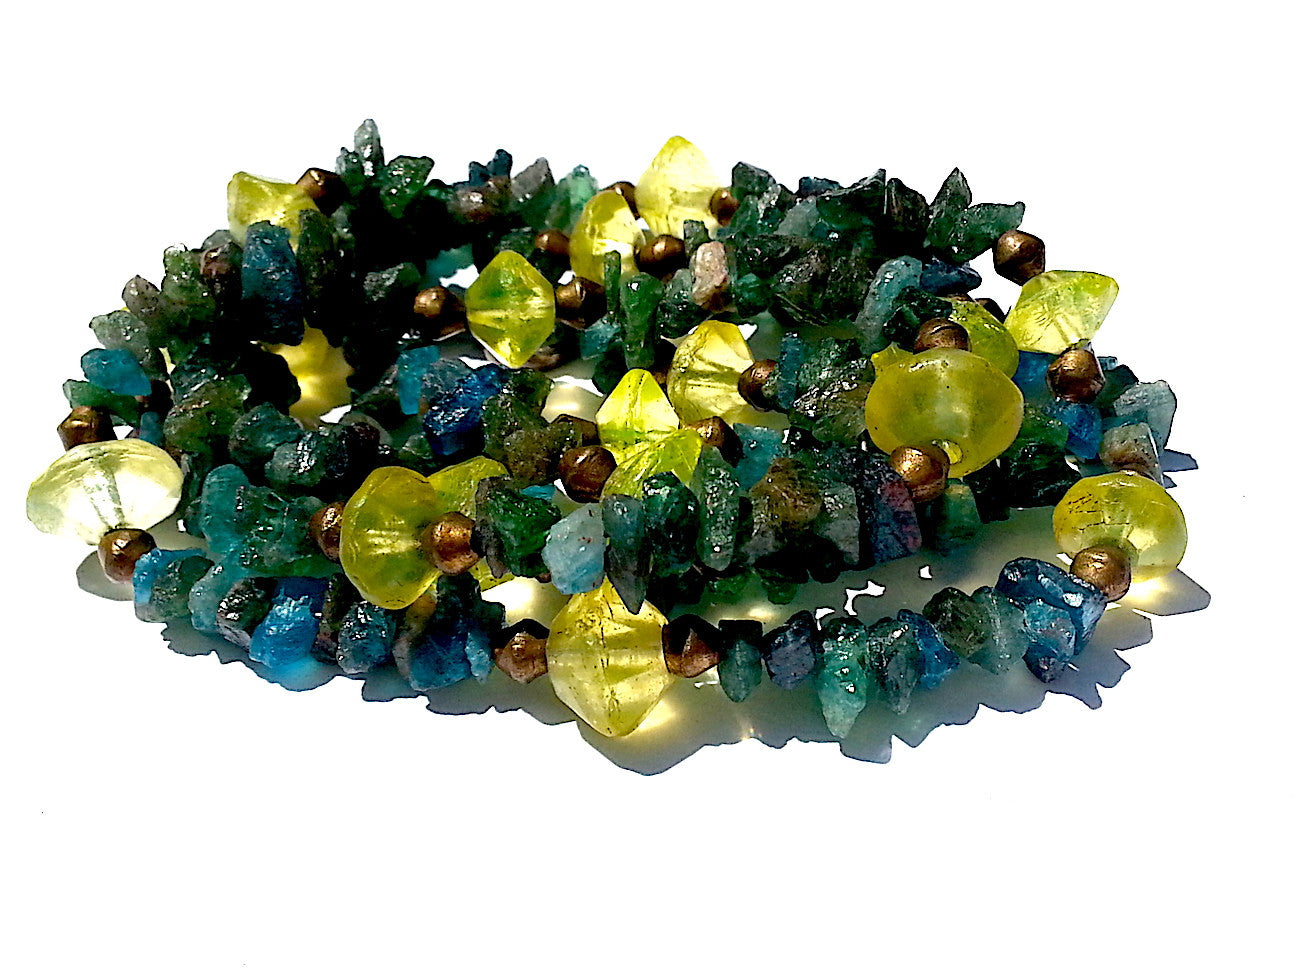 Necklace Apatite and Peridot Double Length